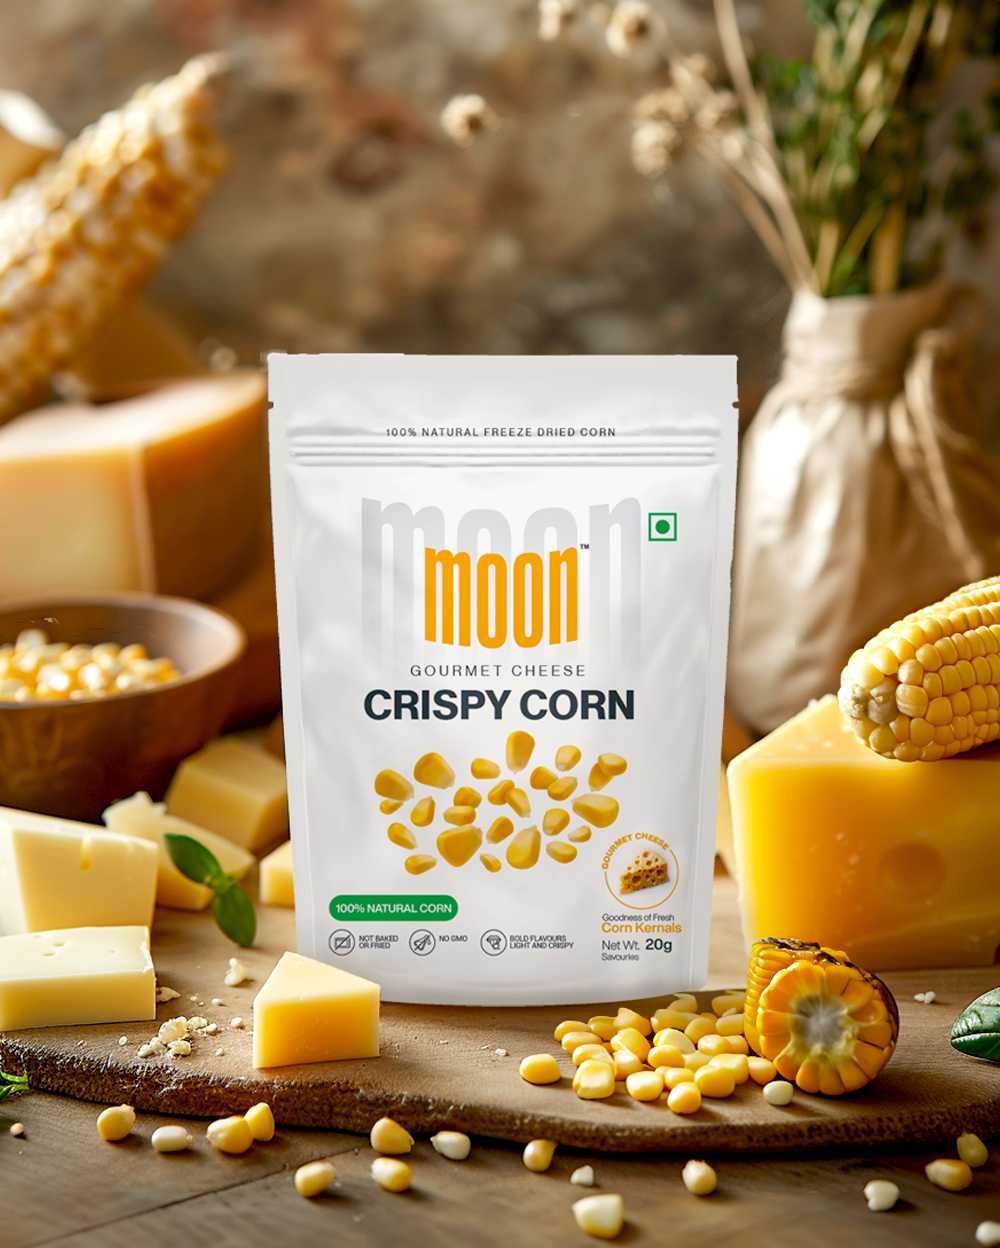 A Freeze Dried Crispy Corn Gourmet Cheese snack, presented on a wooden table, made by MOONFREEZE FOODS PRIVATE LIMITED.